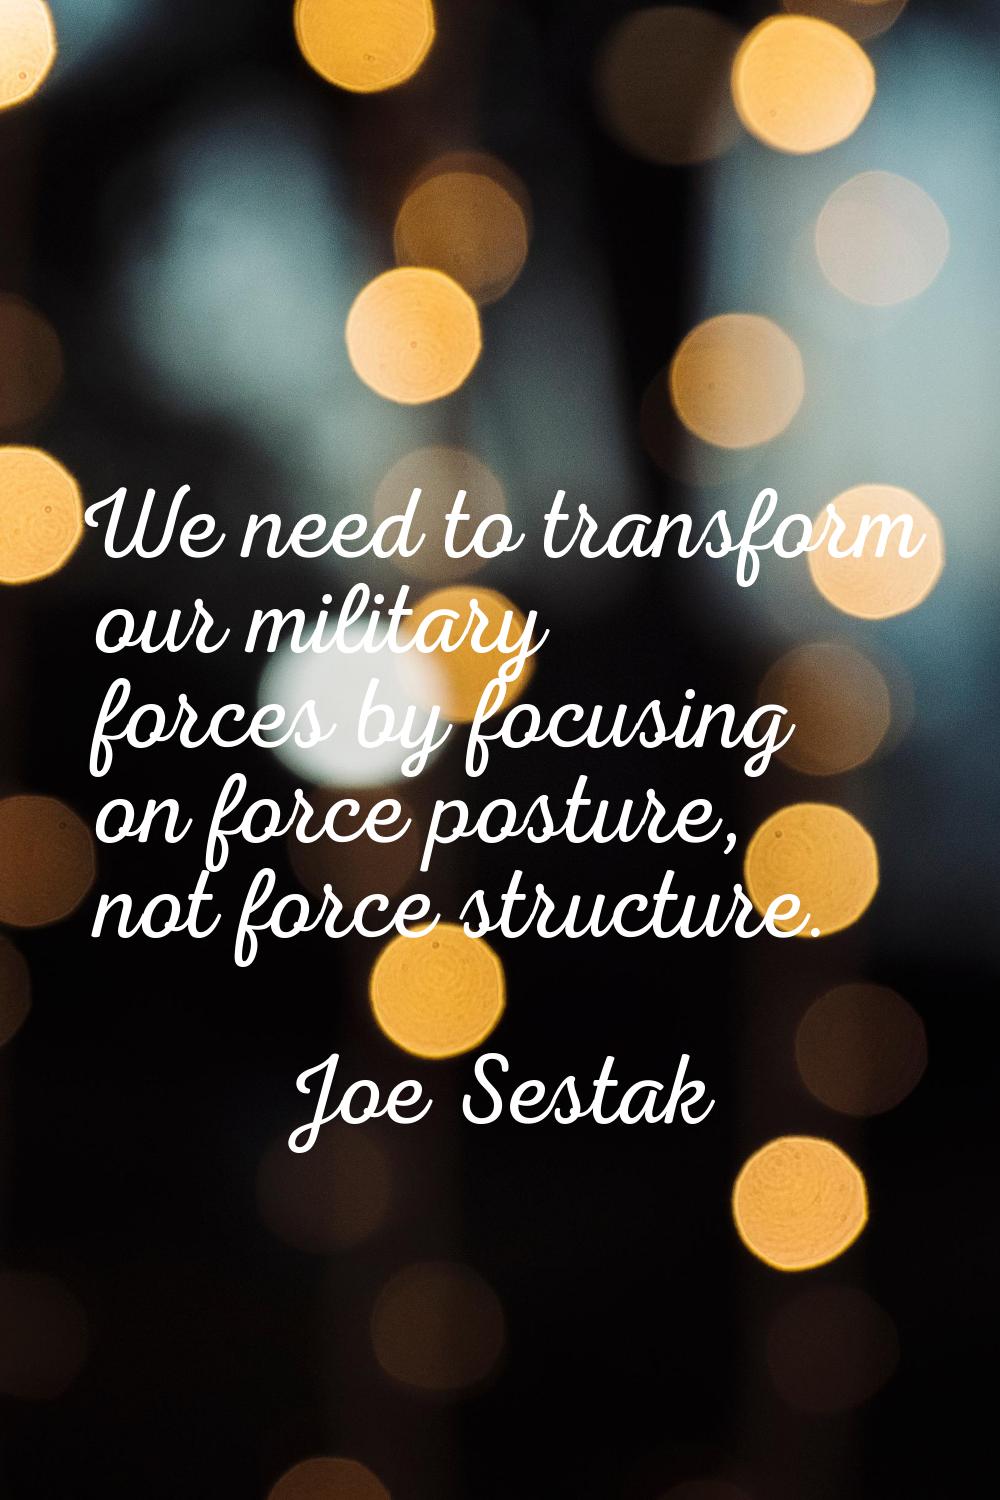 We need to transform our military forces by focusing on force posture, not force structure.